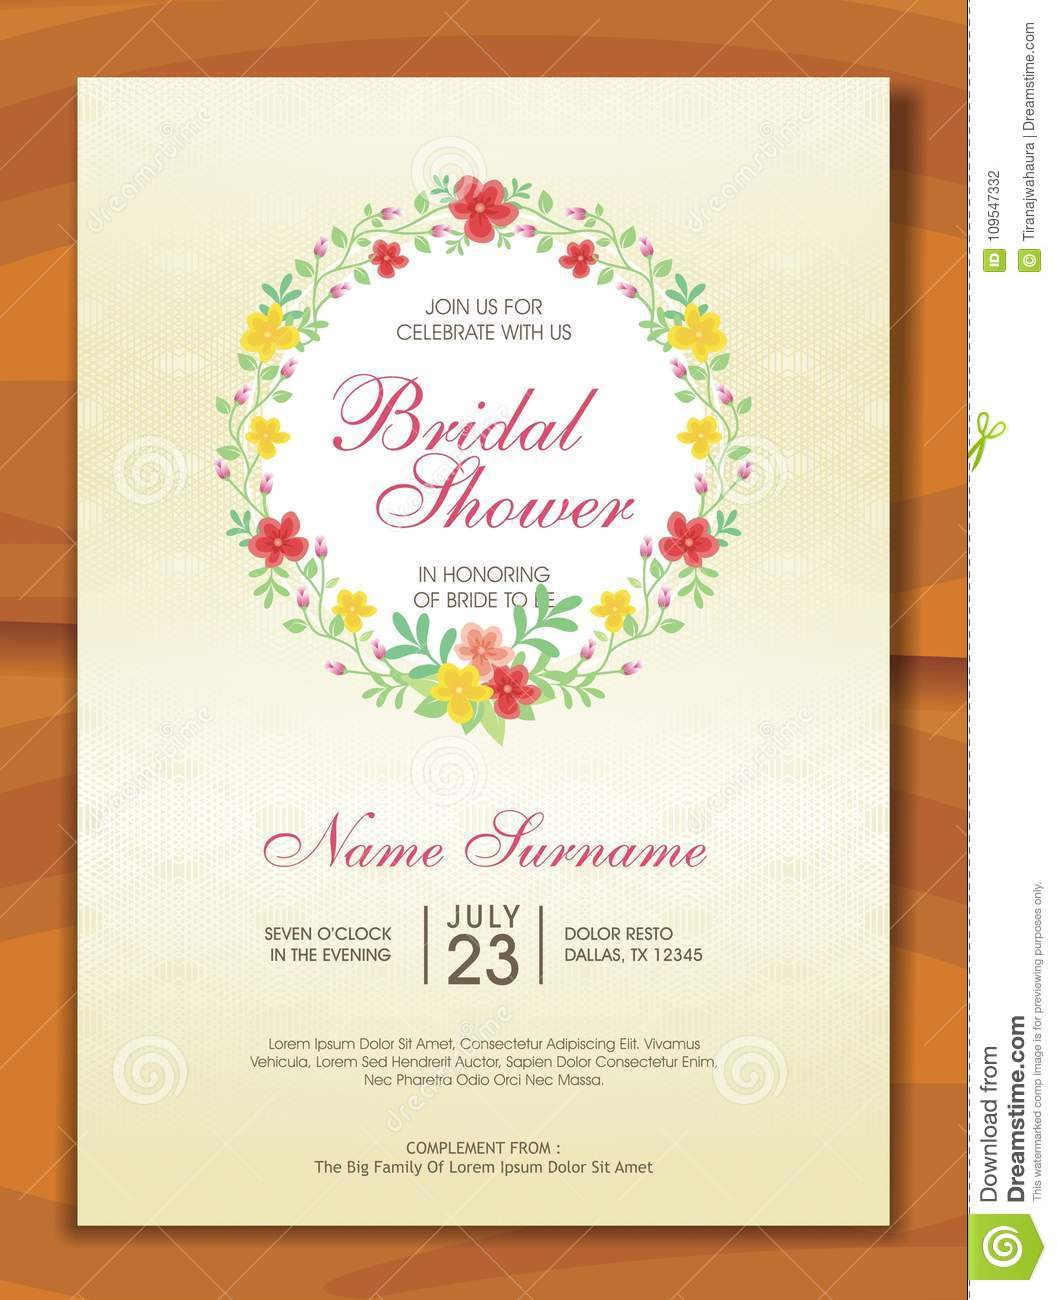 Bridal Shower Invitation With Lovely Design Stock Vector for measurements 1057 X 1300